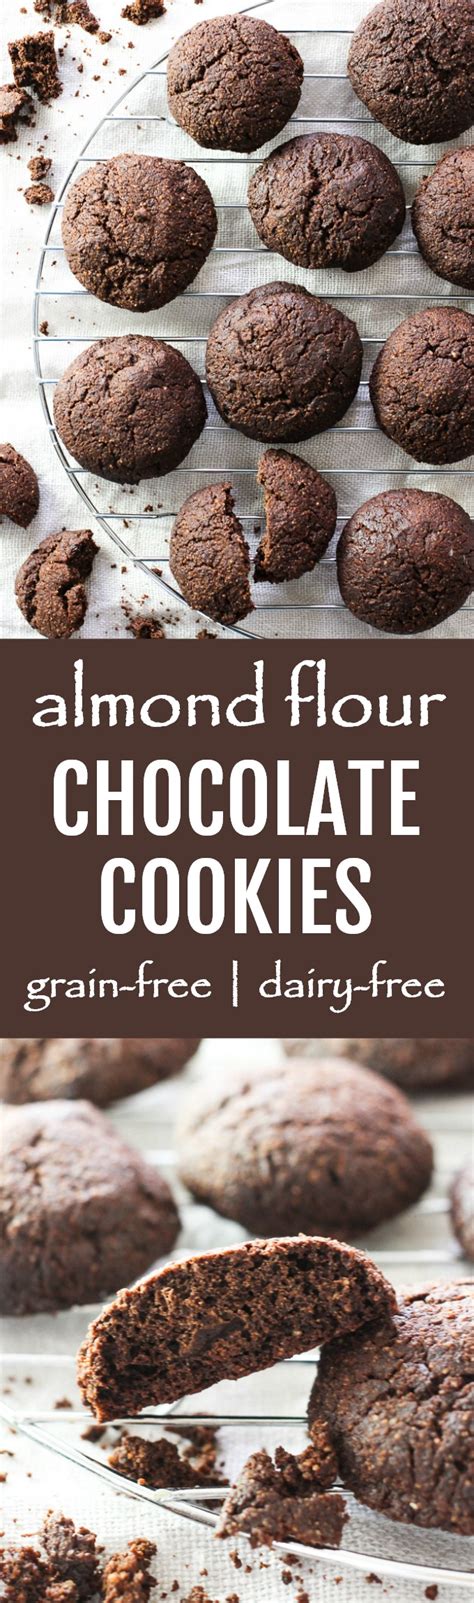 These almond thumbprint cookies are made with almond flour, homemade berry jam, and sweetened with maple syrup. These almond flour chocolate cookies are grain and dairy ...